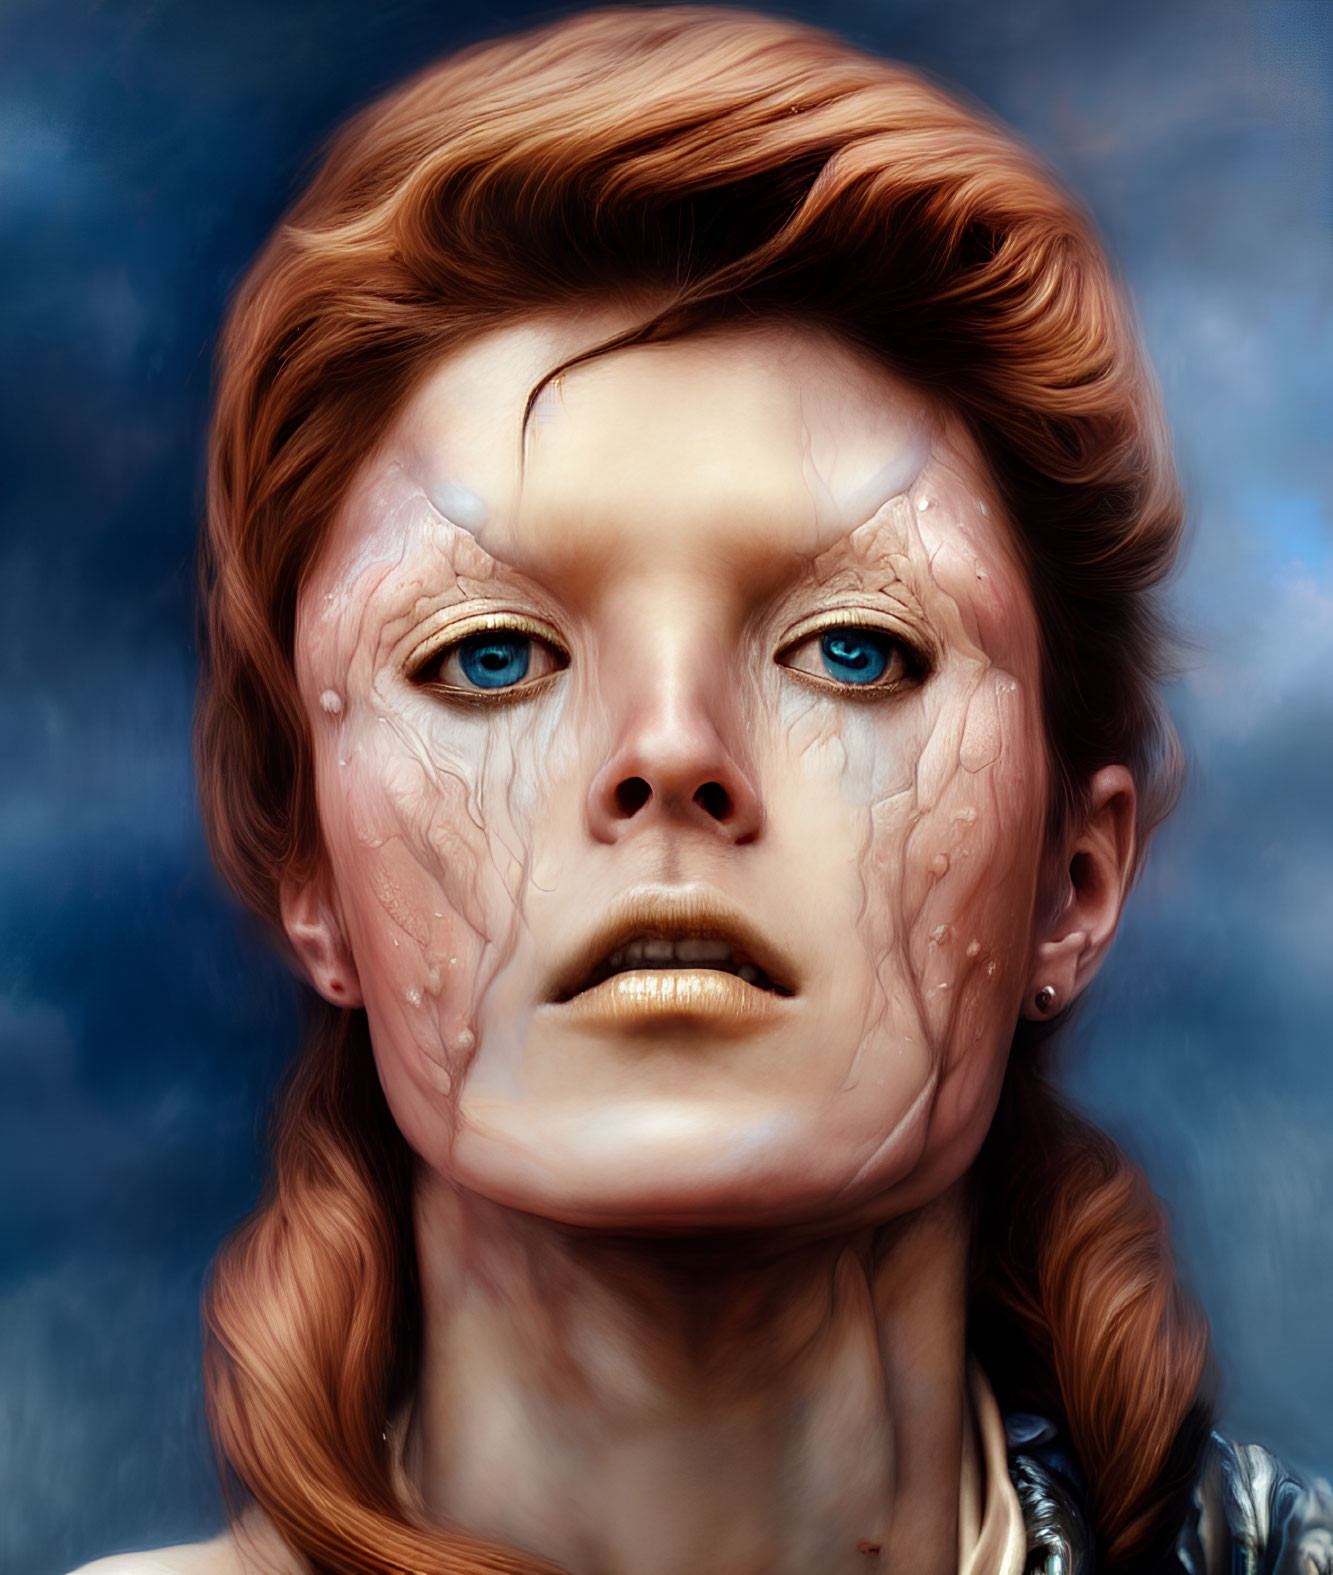 Digital artwork: Woman with blue eyes, marble skin, red hair, and golden lips on blue cloudy